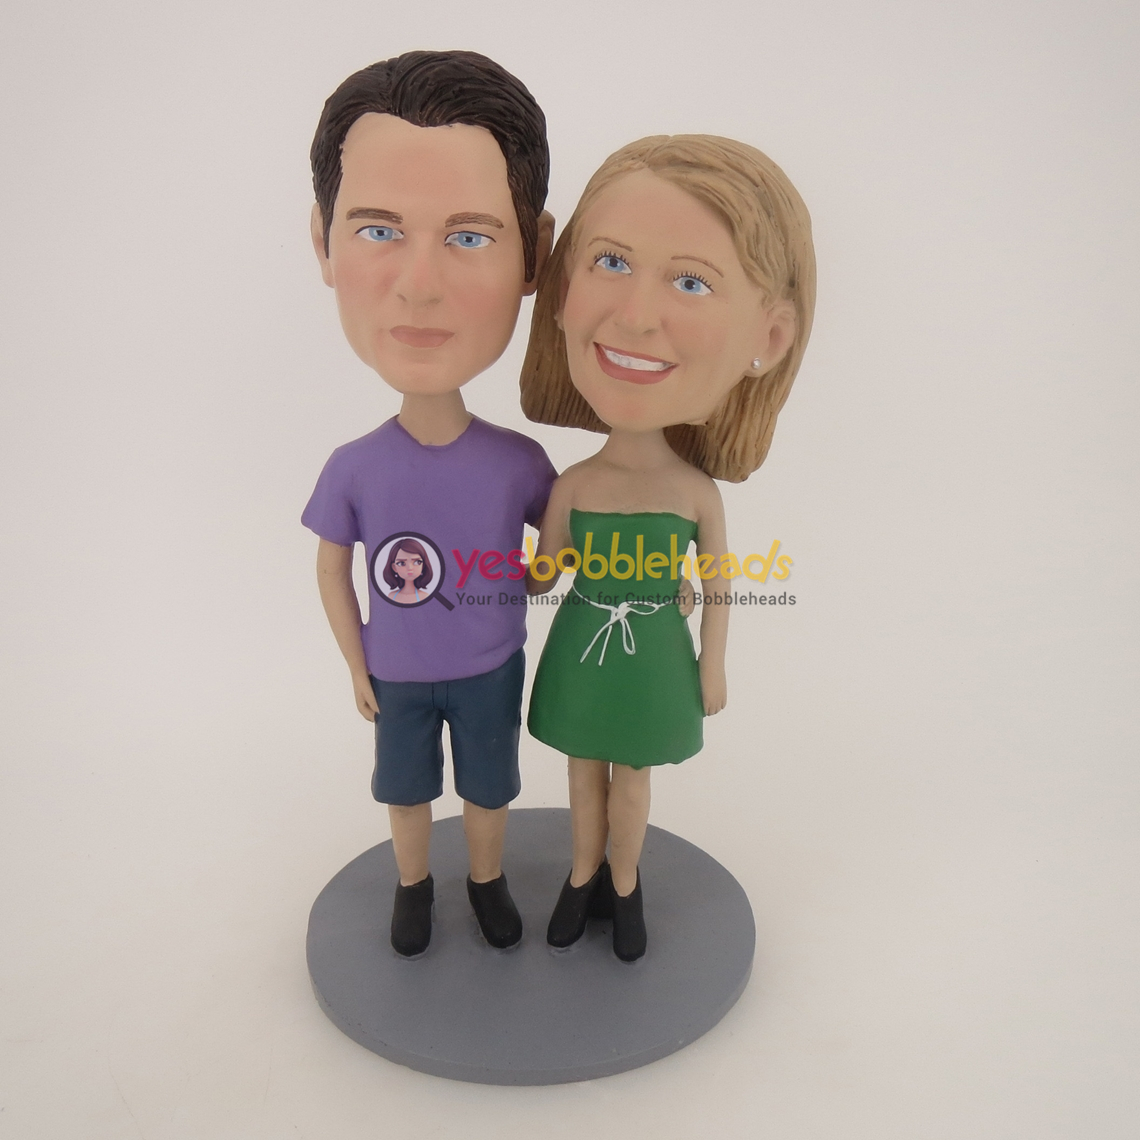 Picture of Custom Bobblehead Doll: Arm Behind Each Other Couple